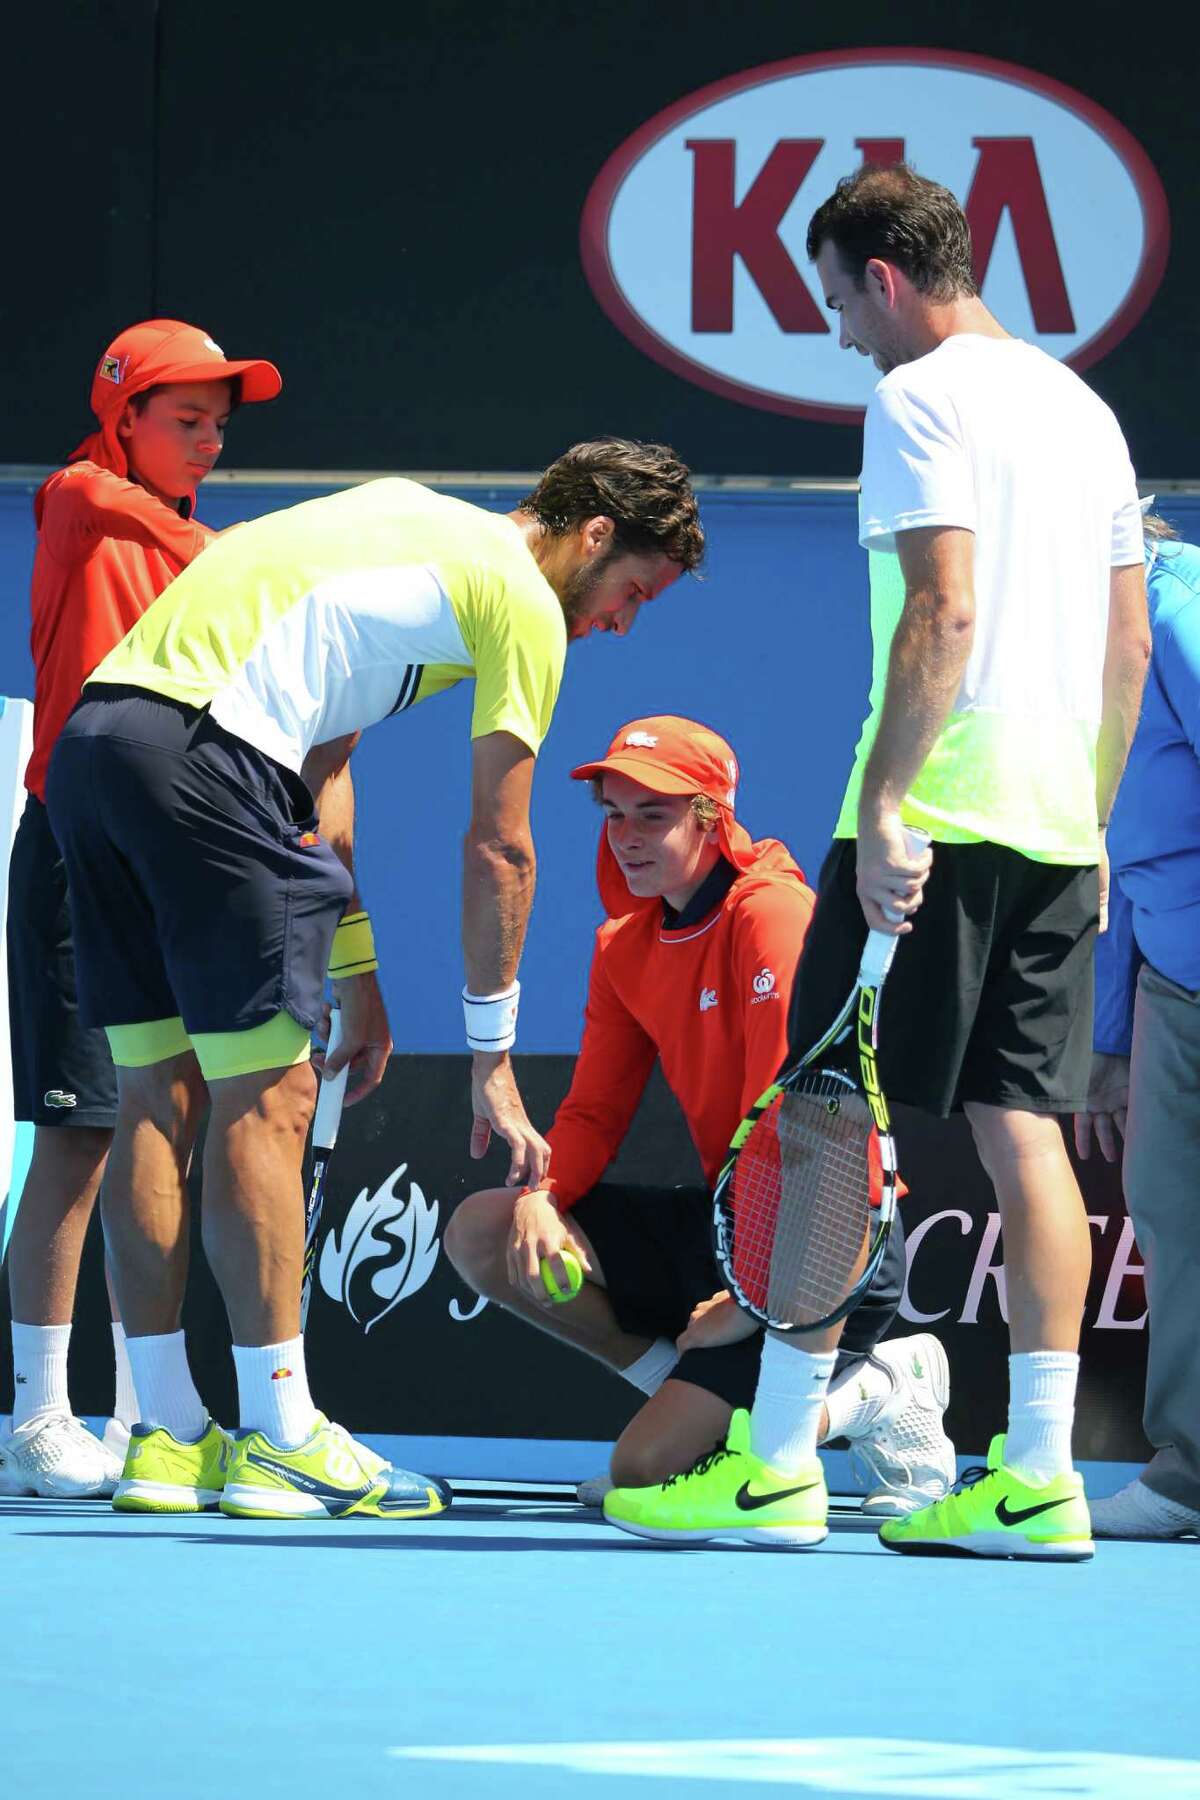 Feliciano Lopez of Spain talks with ball boy Sam Day after striking him with a served ball at the 2015 Australian Open at Melbourne Park.